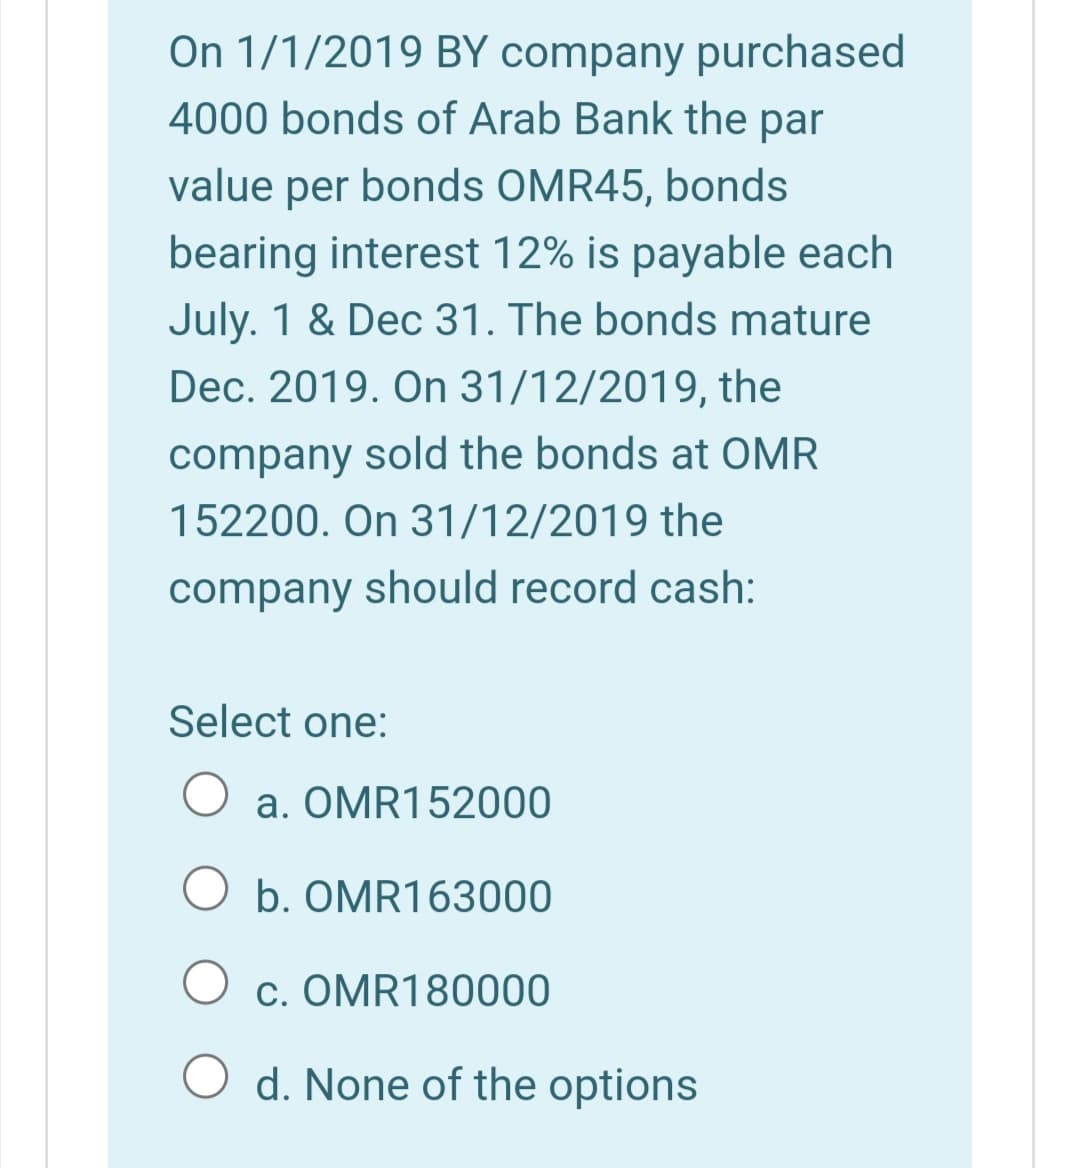 On 1/1/2019 BY company purchased
4000 bonds of Arab Bank the par
value per bonds OMR45, bonds
bearing interest 12% is payable each
July. 1 & Dec 31. The bonds mature
Dec. 2019. On 31/12/2019, the
company sold the bonds at OMR
152200. On 31/12/2019 the
company should record cash:
Select one:
a. OMR152000
b. OMR163000
c. OMR180000
O d. None of the options
